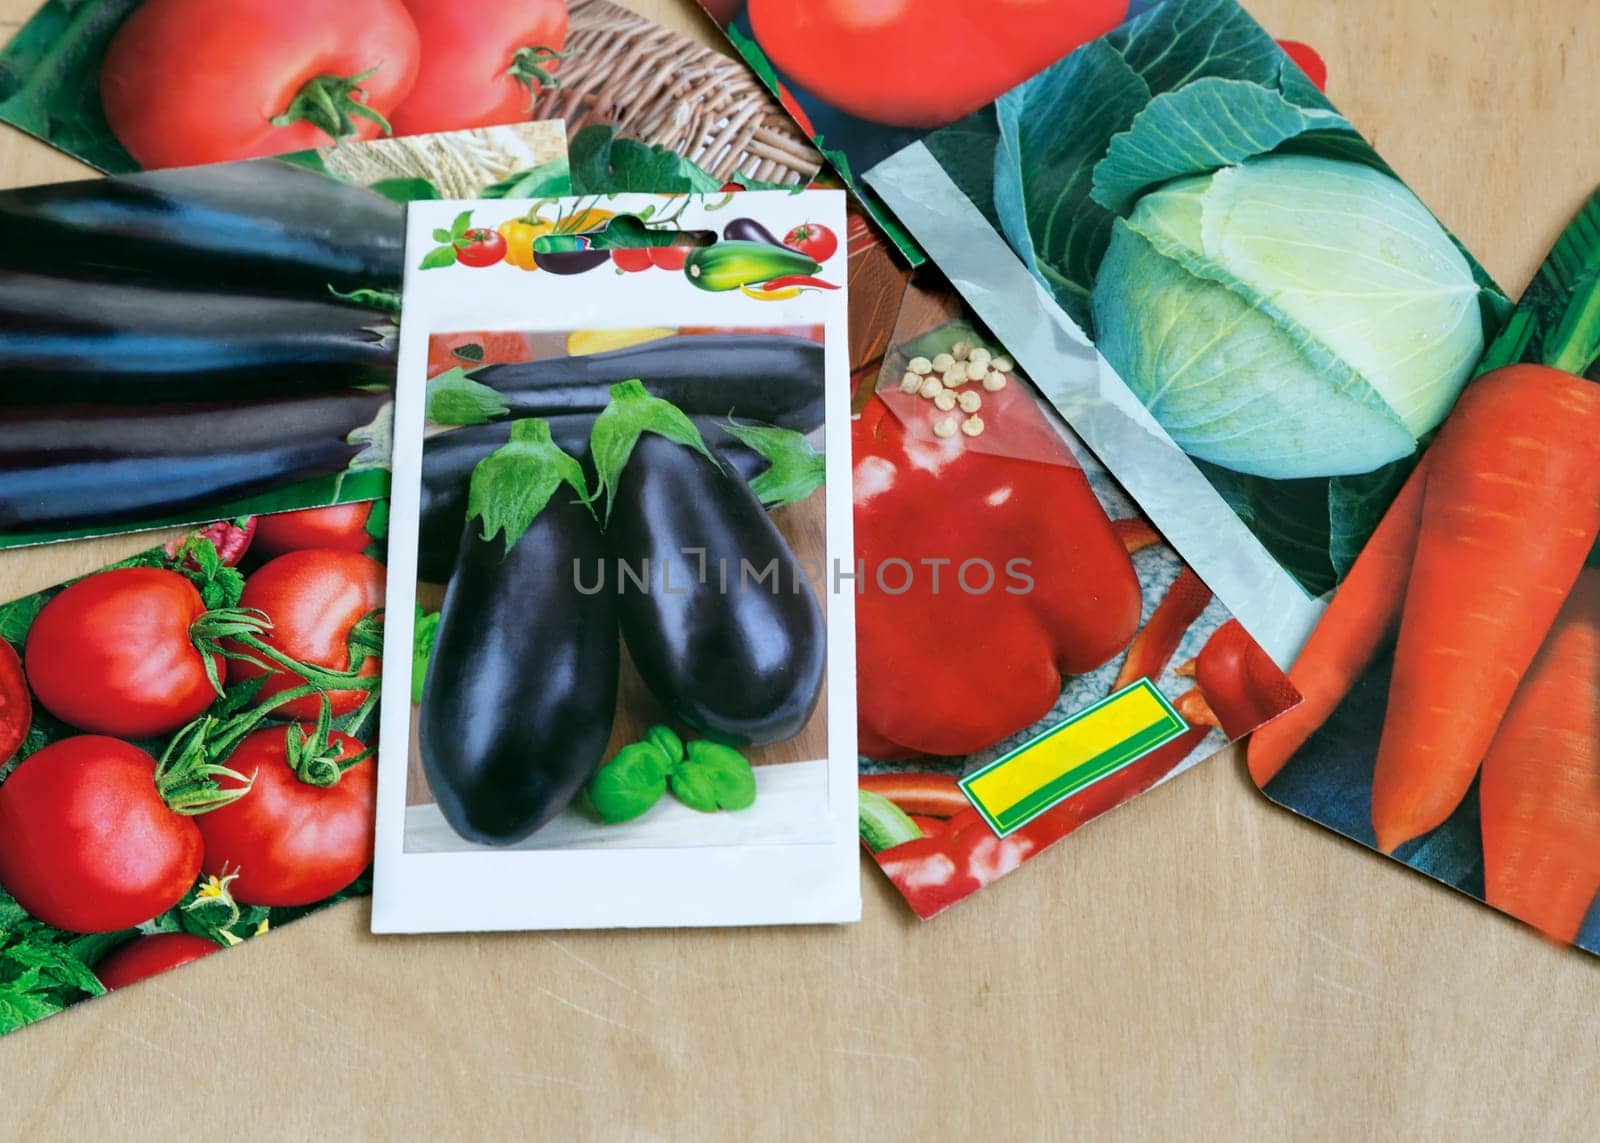 On the table are beautifully decorated packets of high quality seeds of various crops.